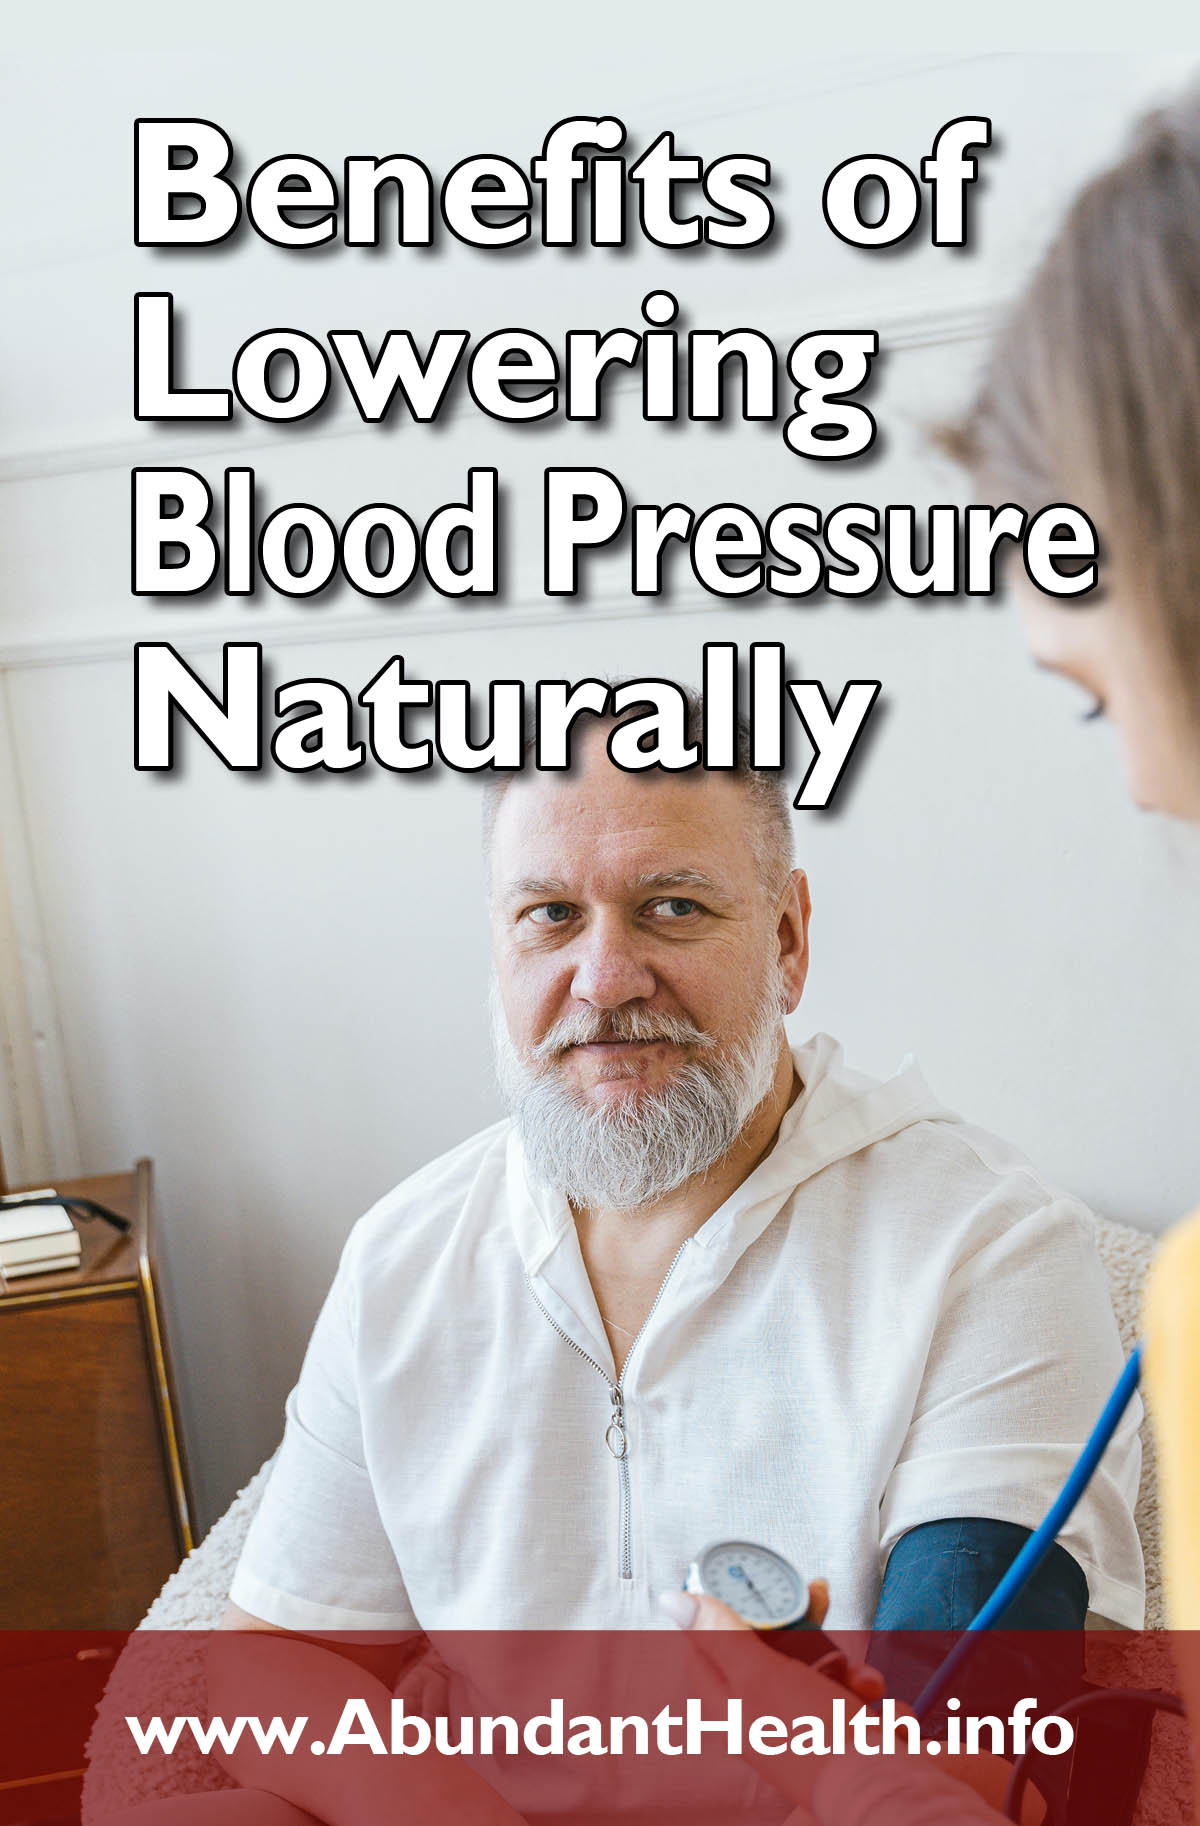 Benefits of Lowering Blood Pressure Naturally